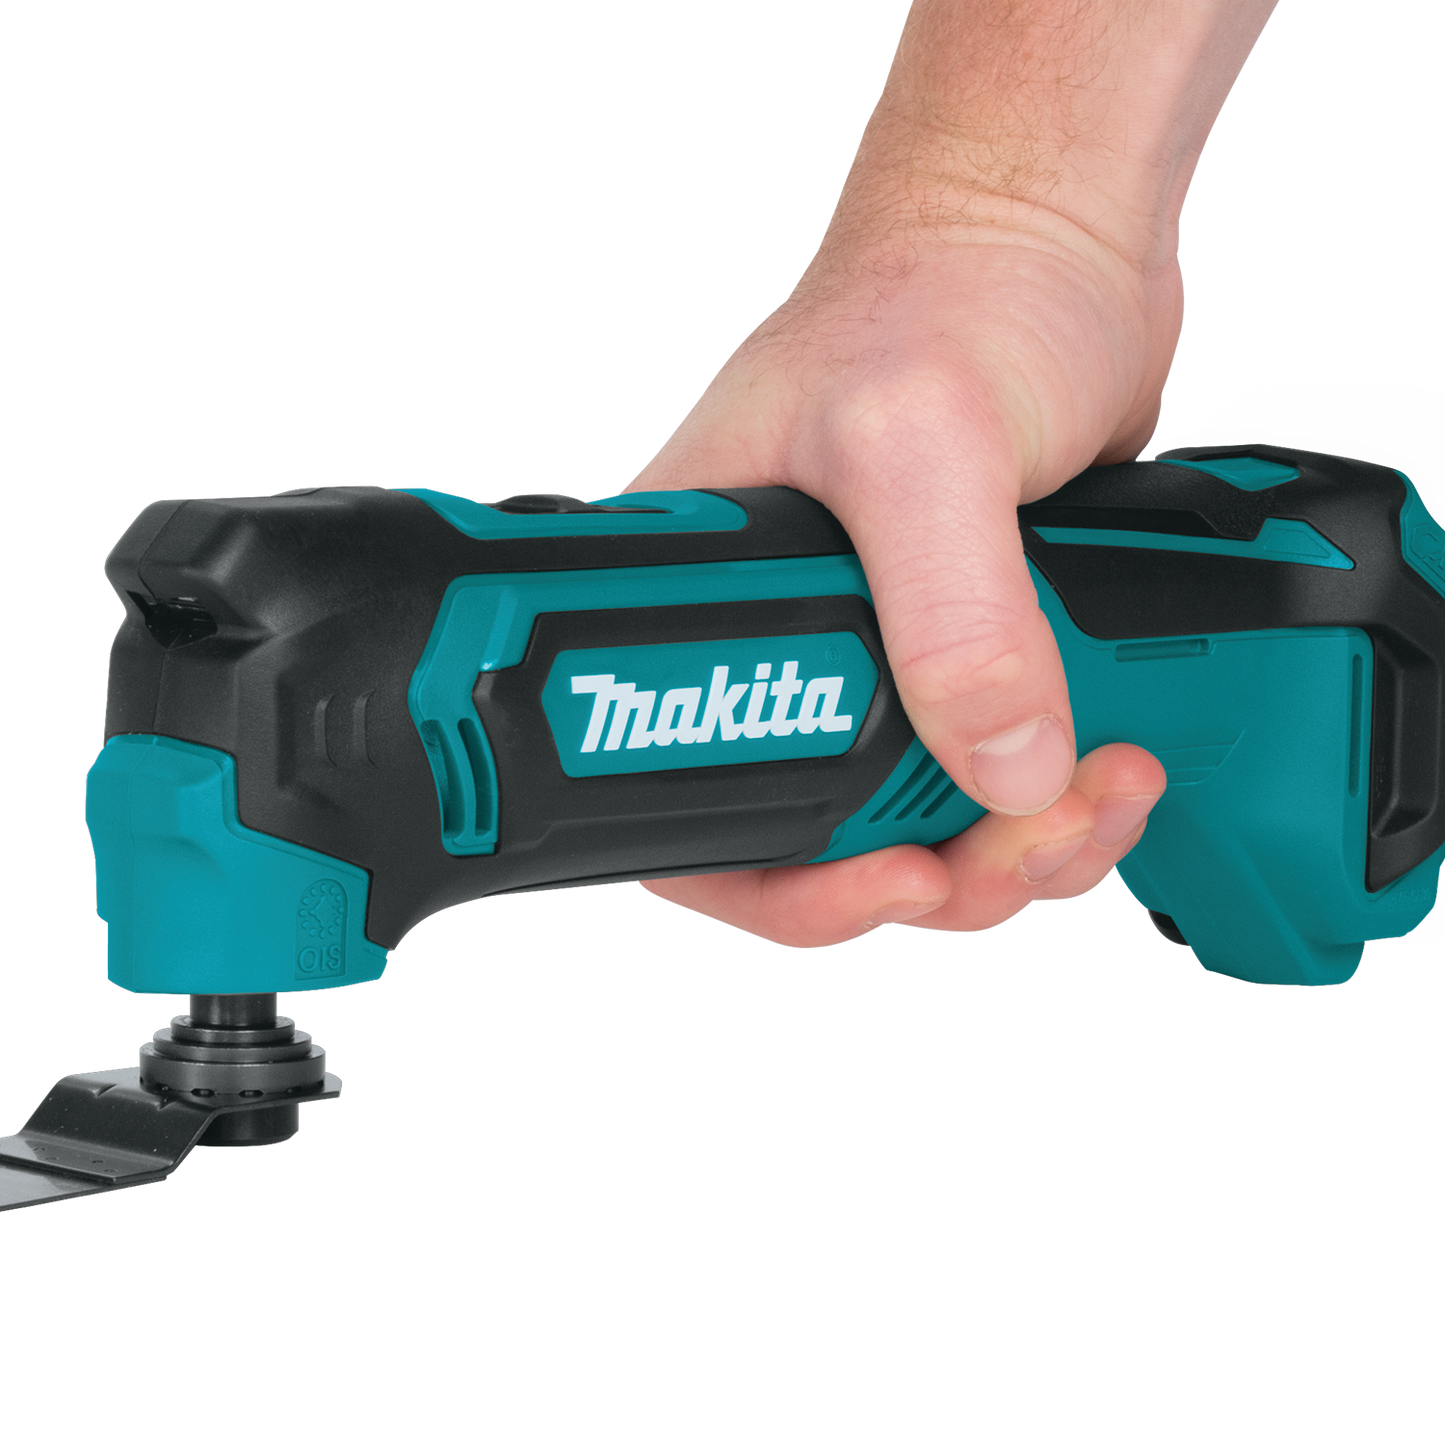 Makita 12 Volt Max Cordless Oscillating Multi Tool Factory Serviced (Tool Only)